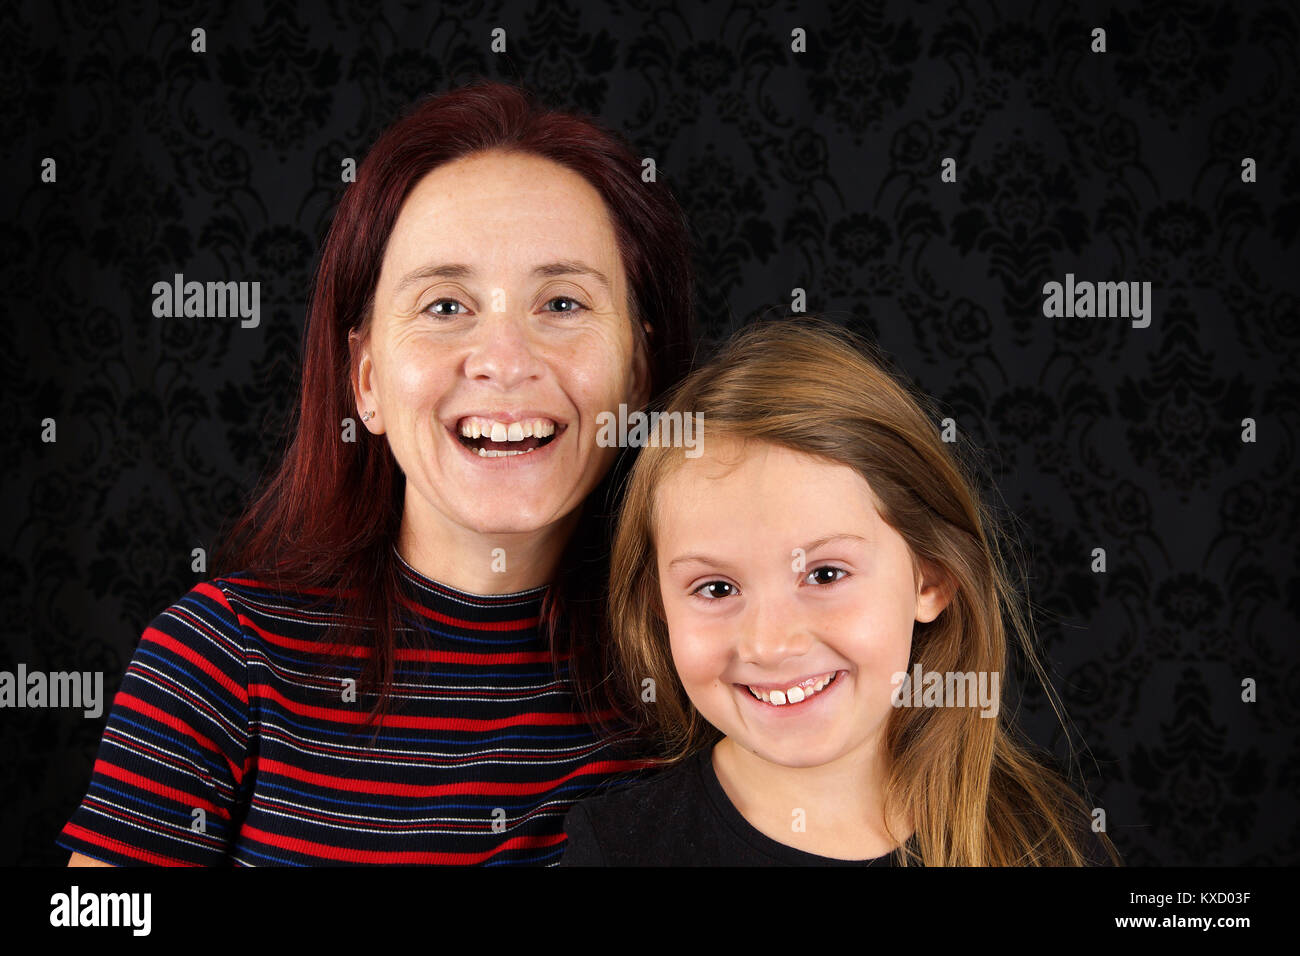 Happy mother and daughter portrait Stock Photo